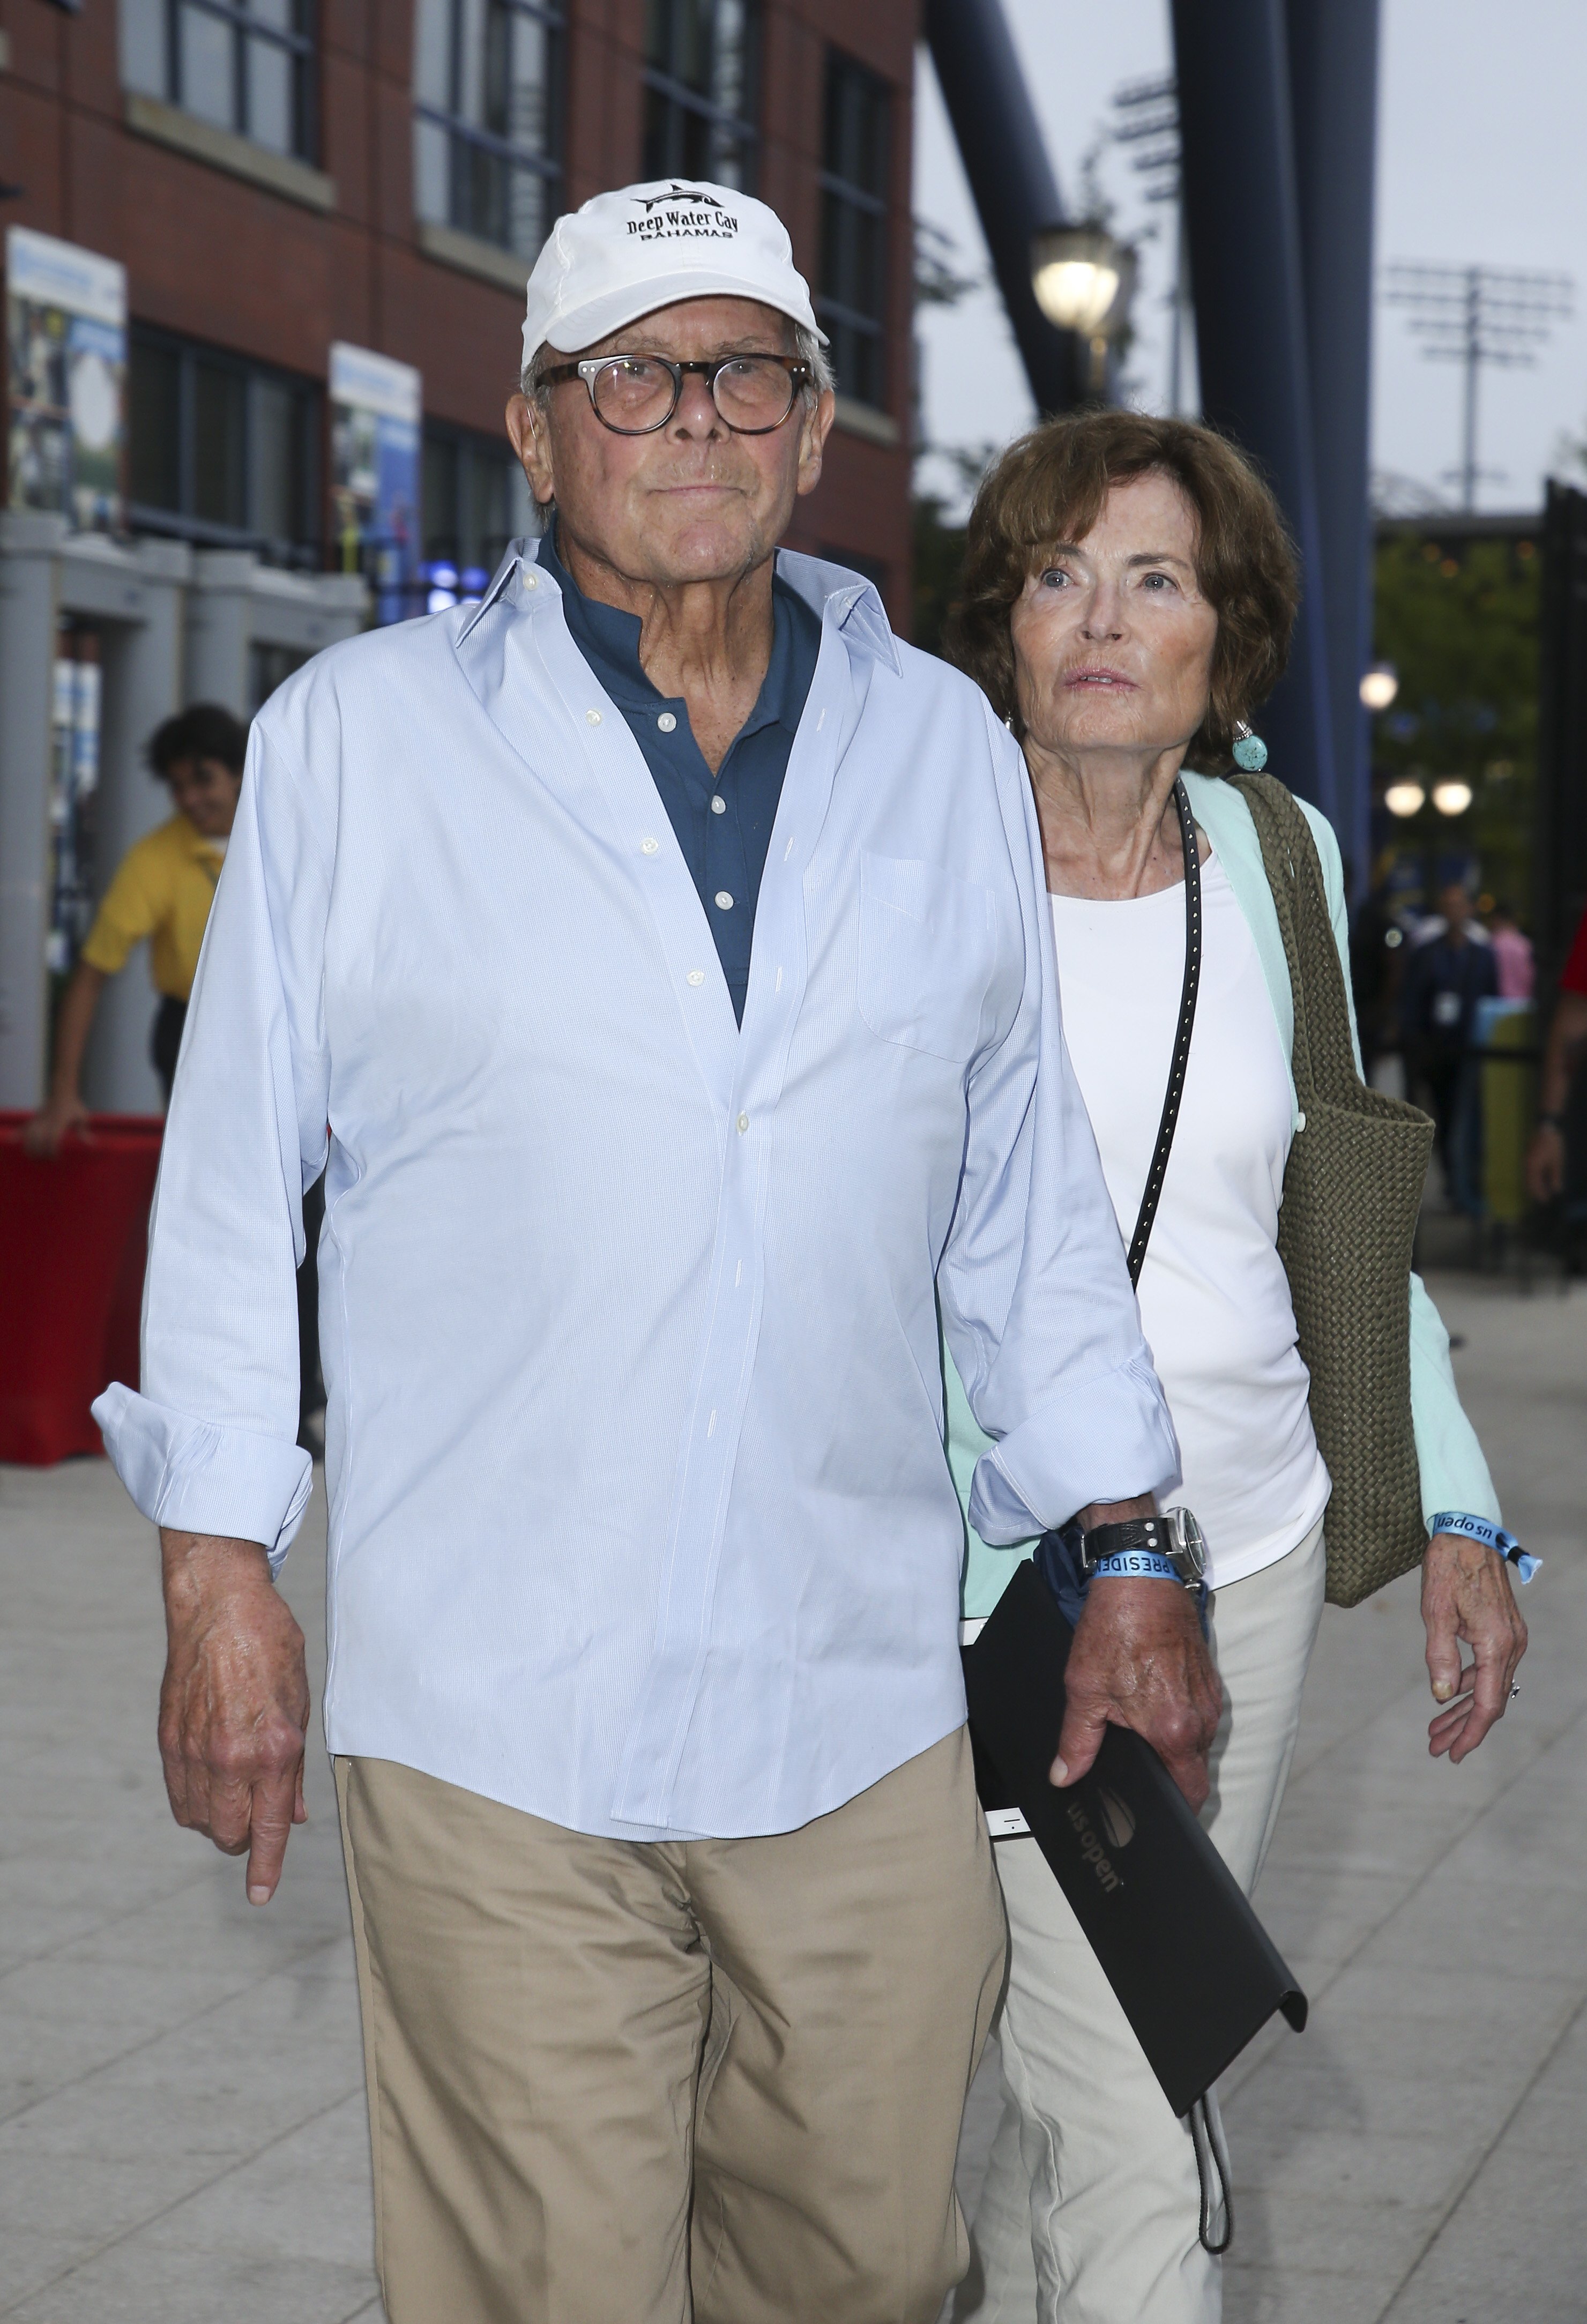 Tom Brokaw and his wife Meredith Lynn Auld attend the men's semifinals on day 12 of the 2018 tennis US Open on Arthur Ashe stadium at the USTA Billie Jean King National Tennis Center on September 7, 2018 in Flushing Meadows , Queens, New York City | Source: Getty Images